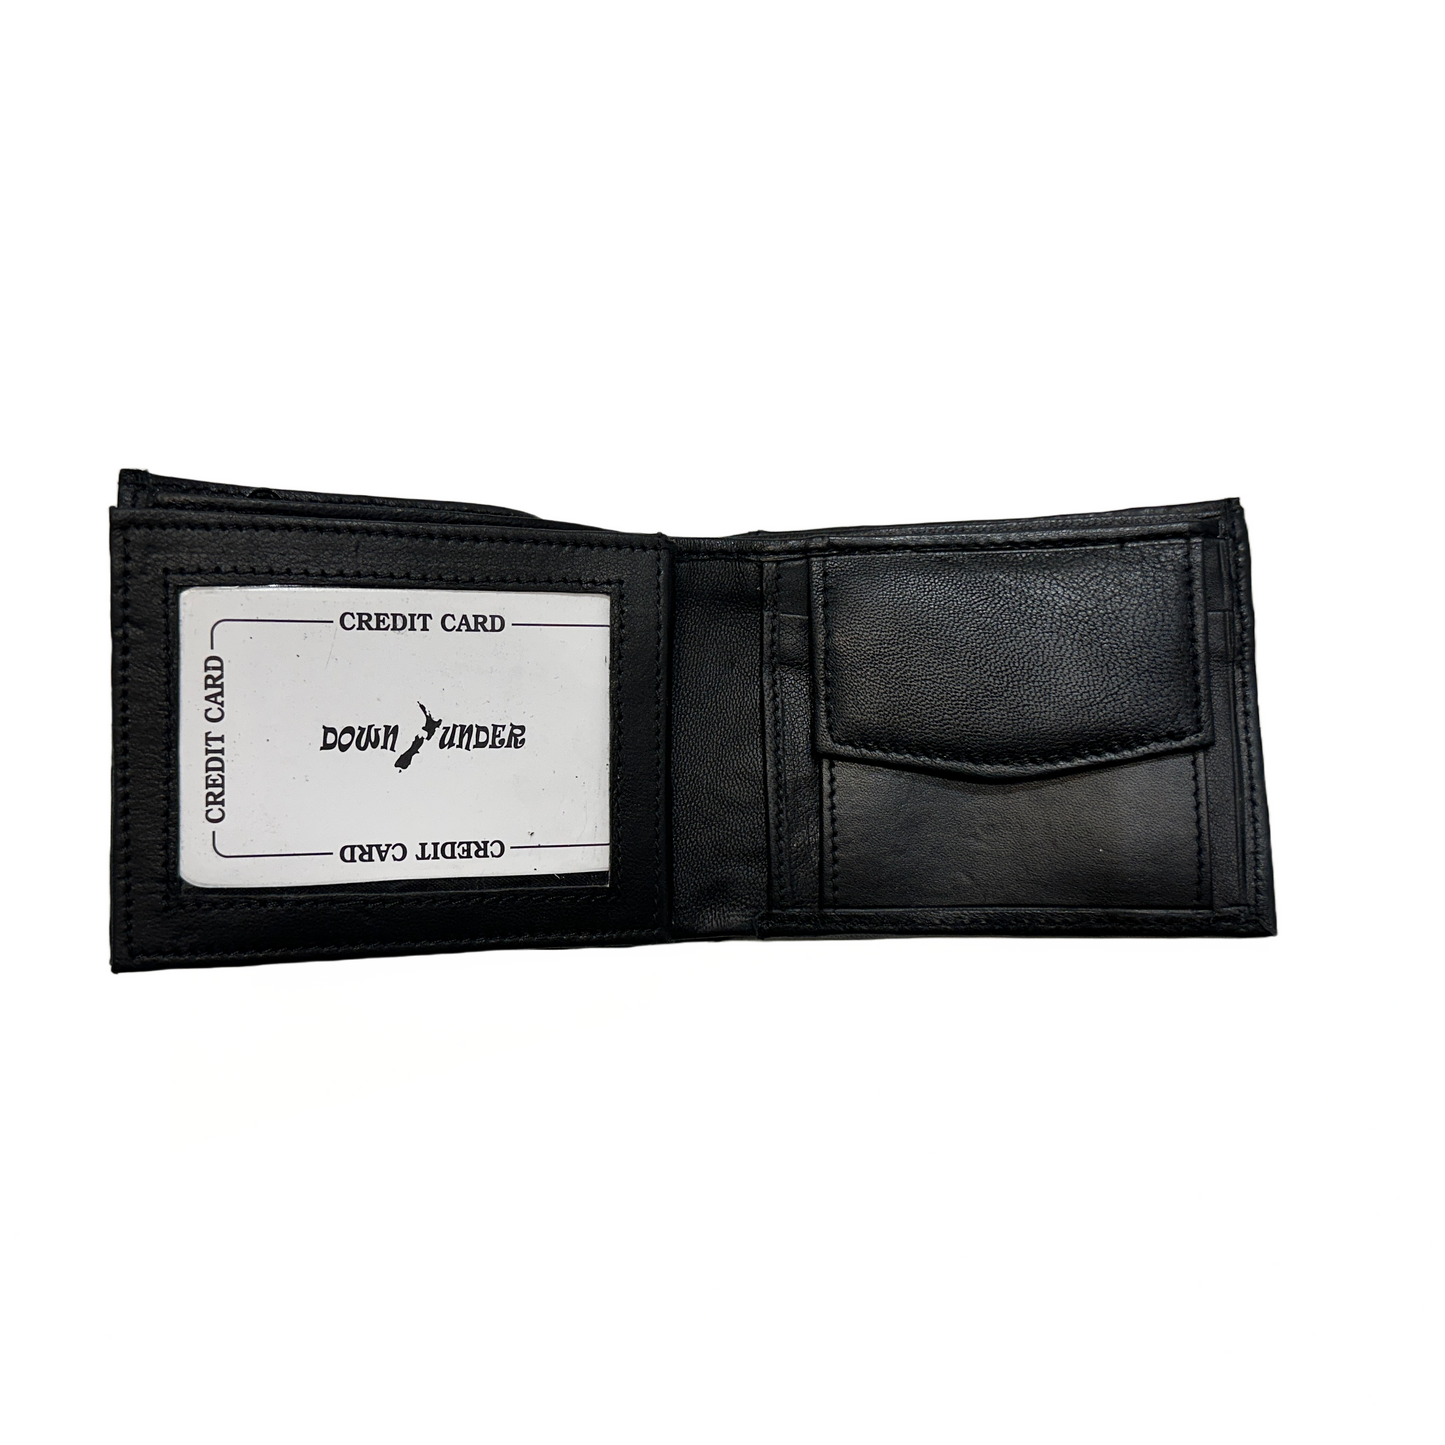 Classic Leather Wallet - Black